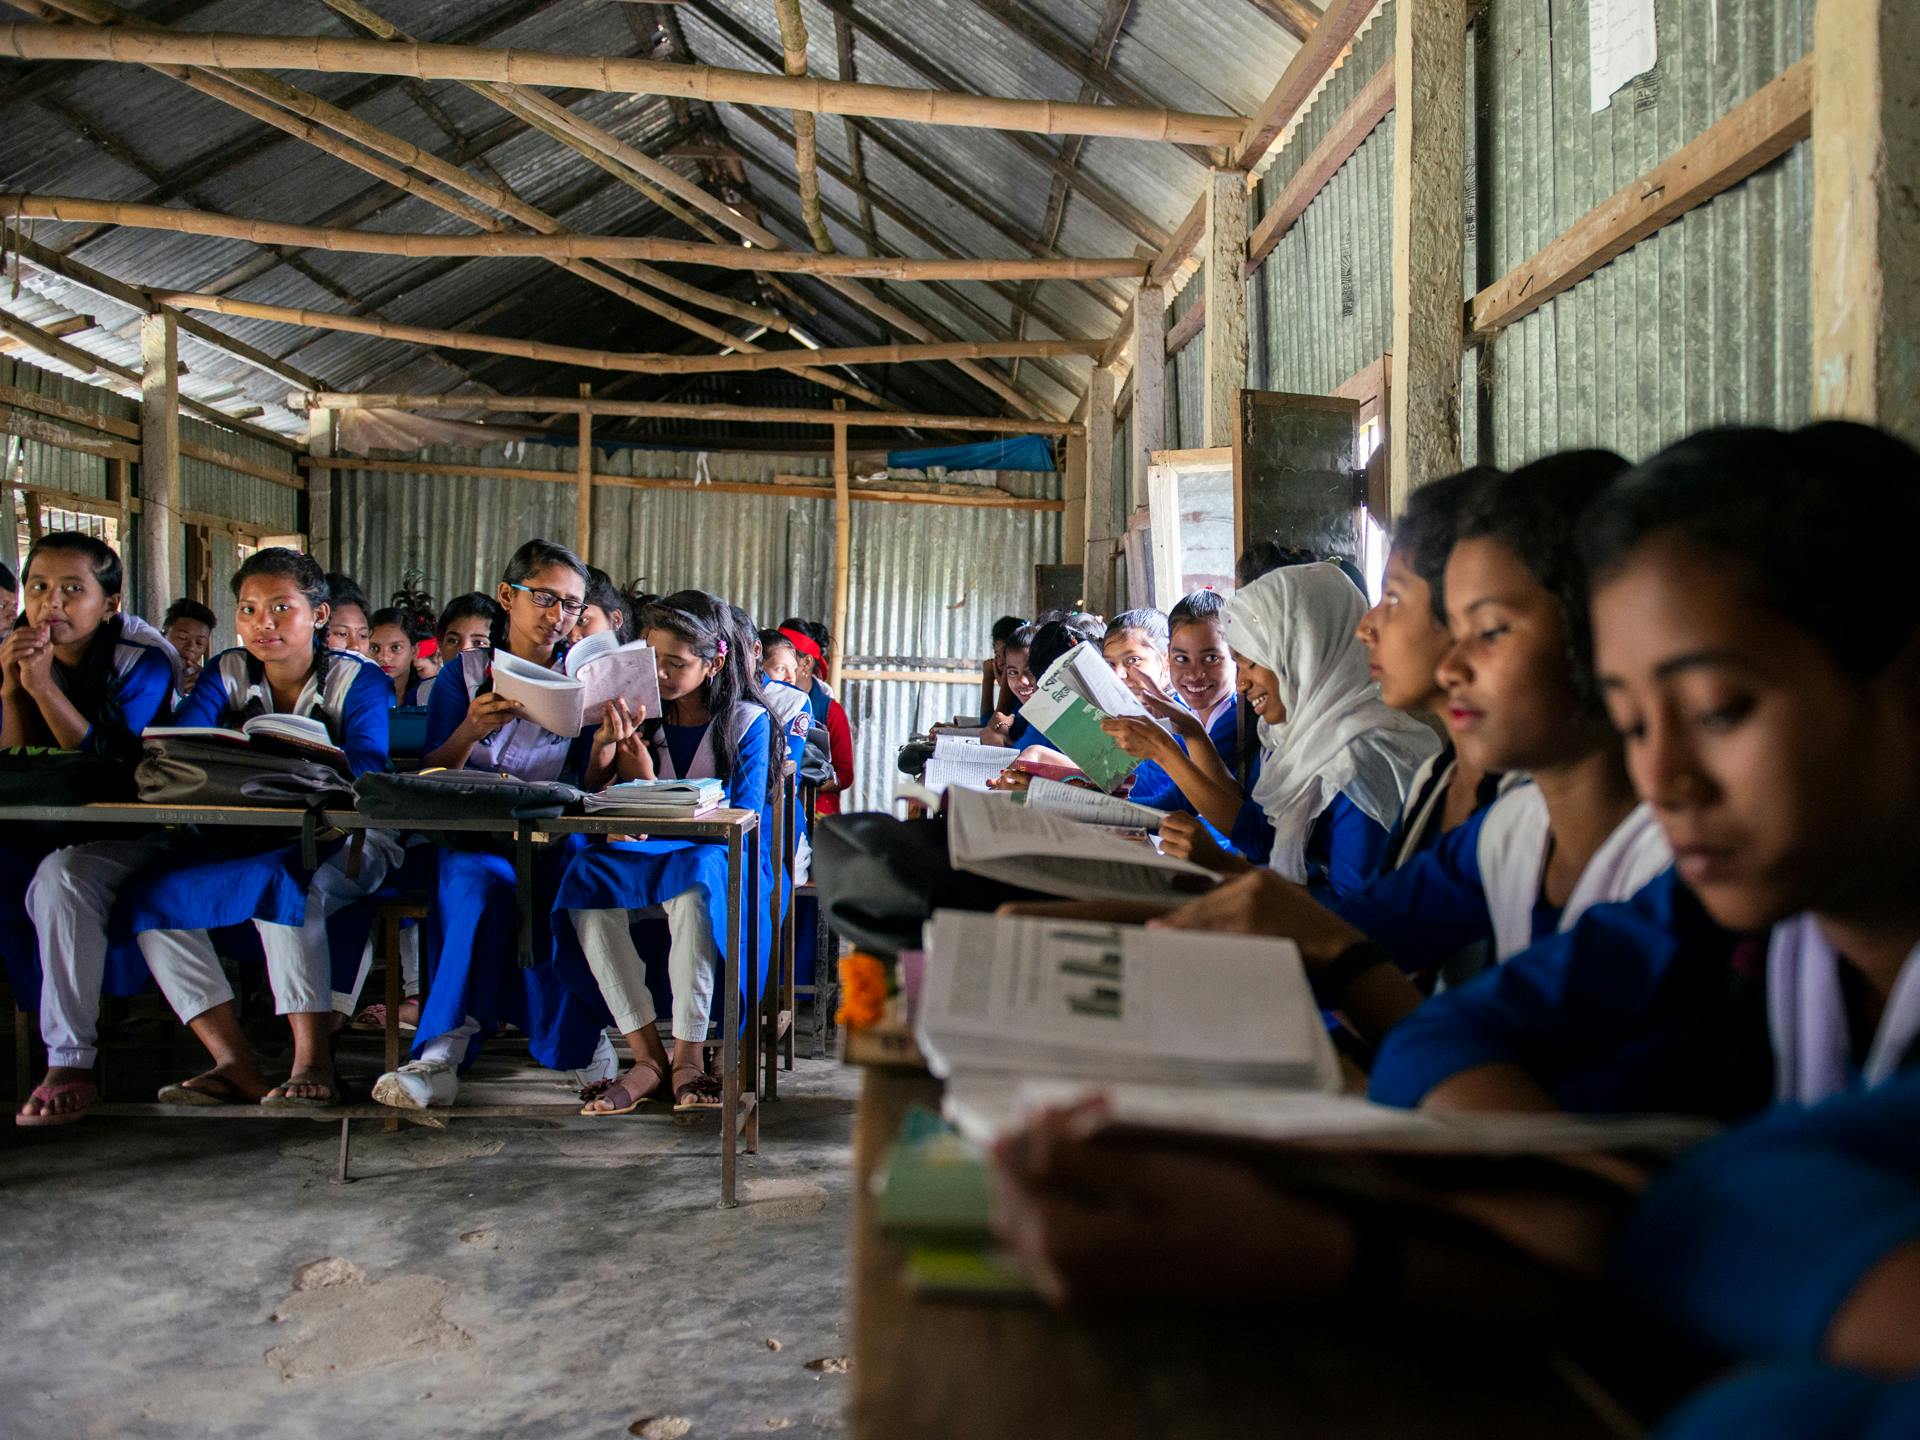 A rural classroom with walls of plate, and a large group of girls sitting by the desks, wearing blue and white school uniforms.